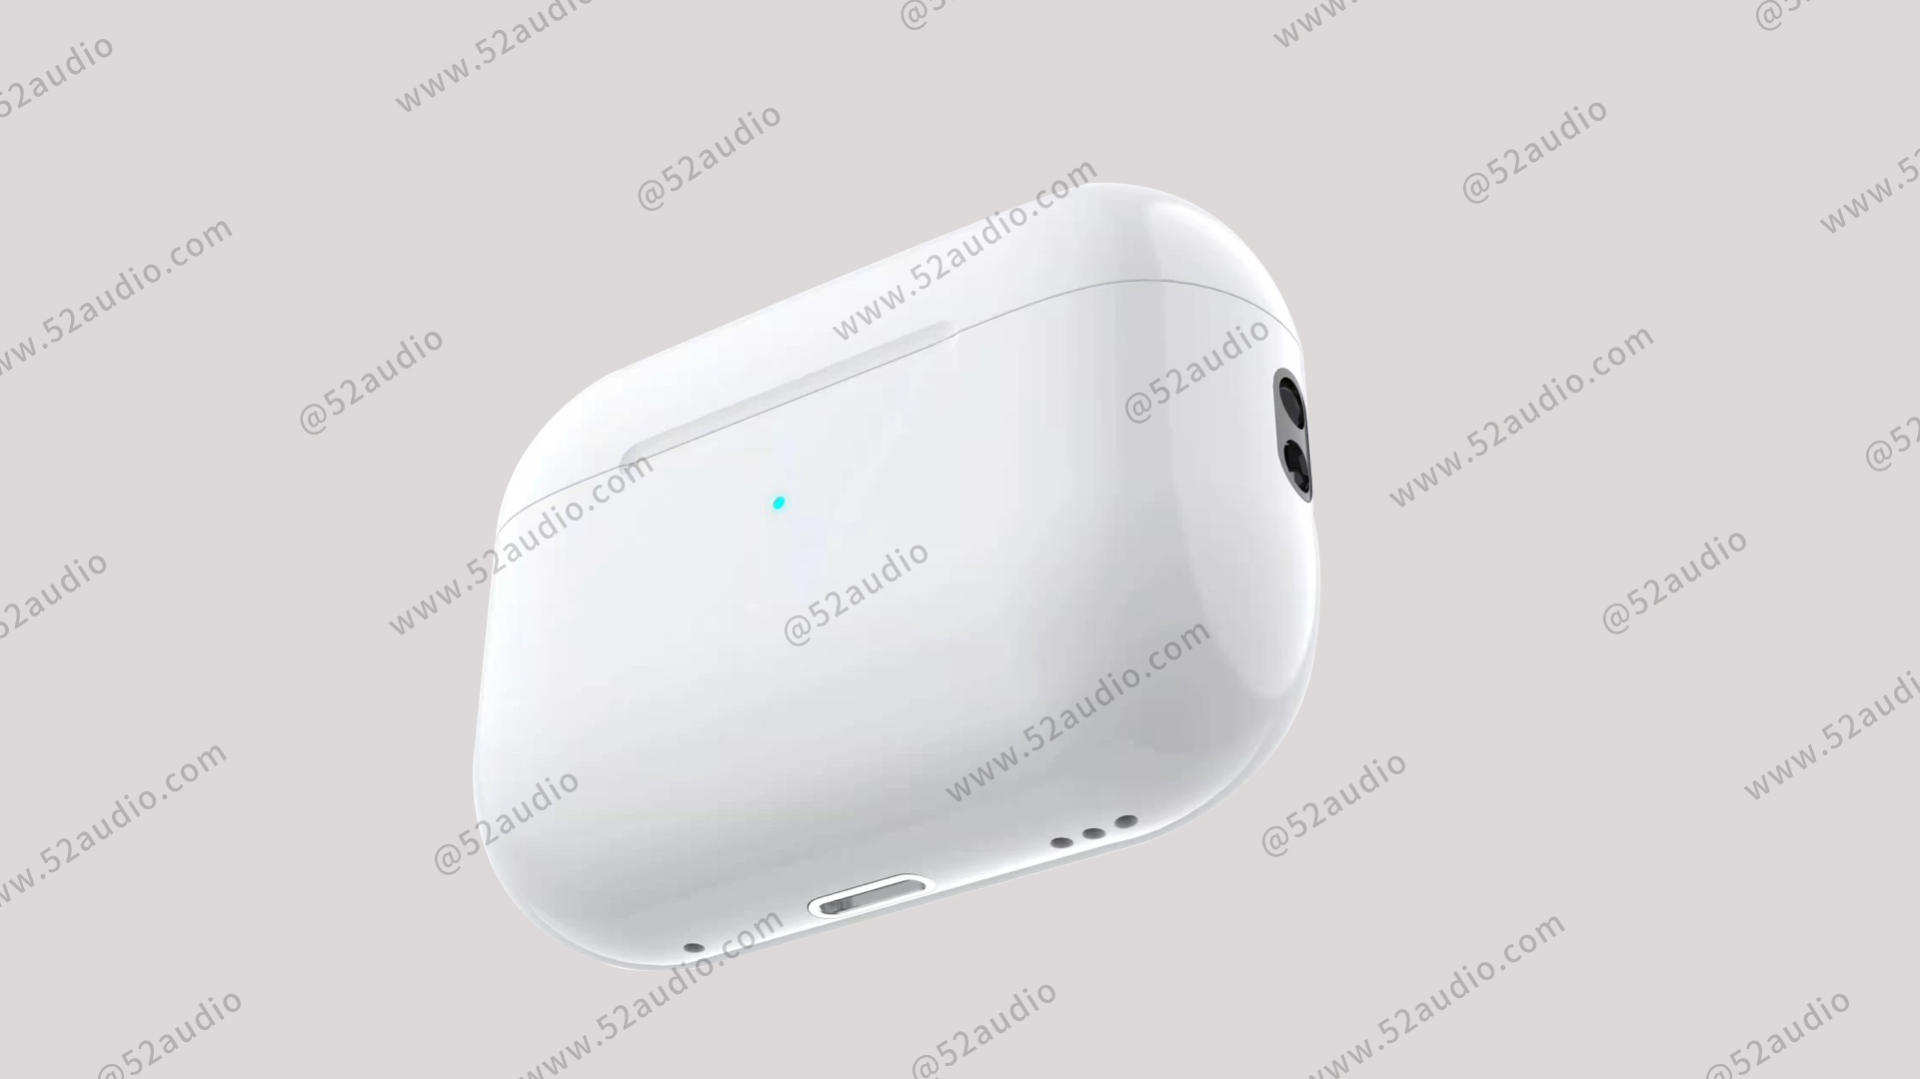 52audio Got New Info on the Apple AirPods Pro 2-我爱音频网